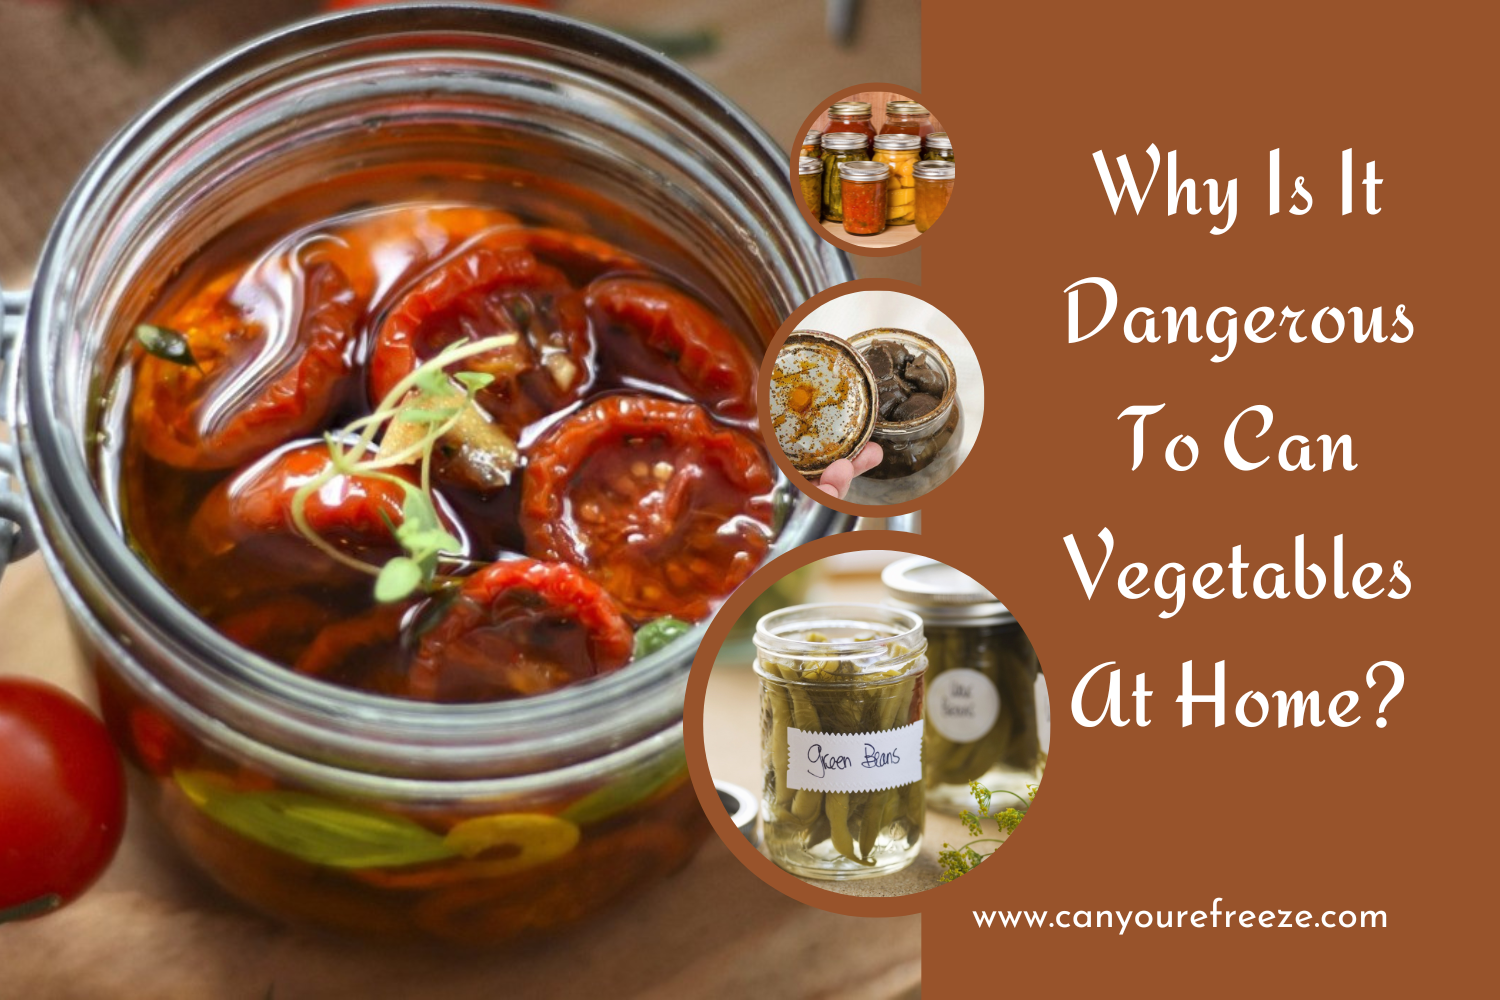 Why Is It Dangerous To Can Vegetables At Home